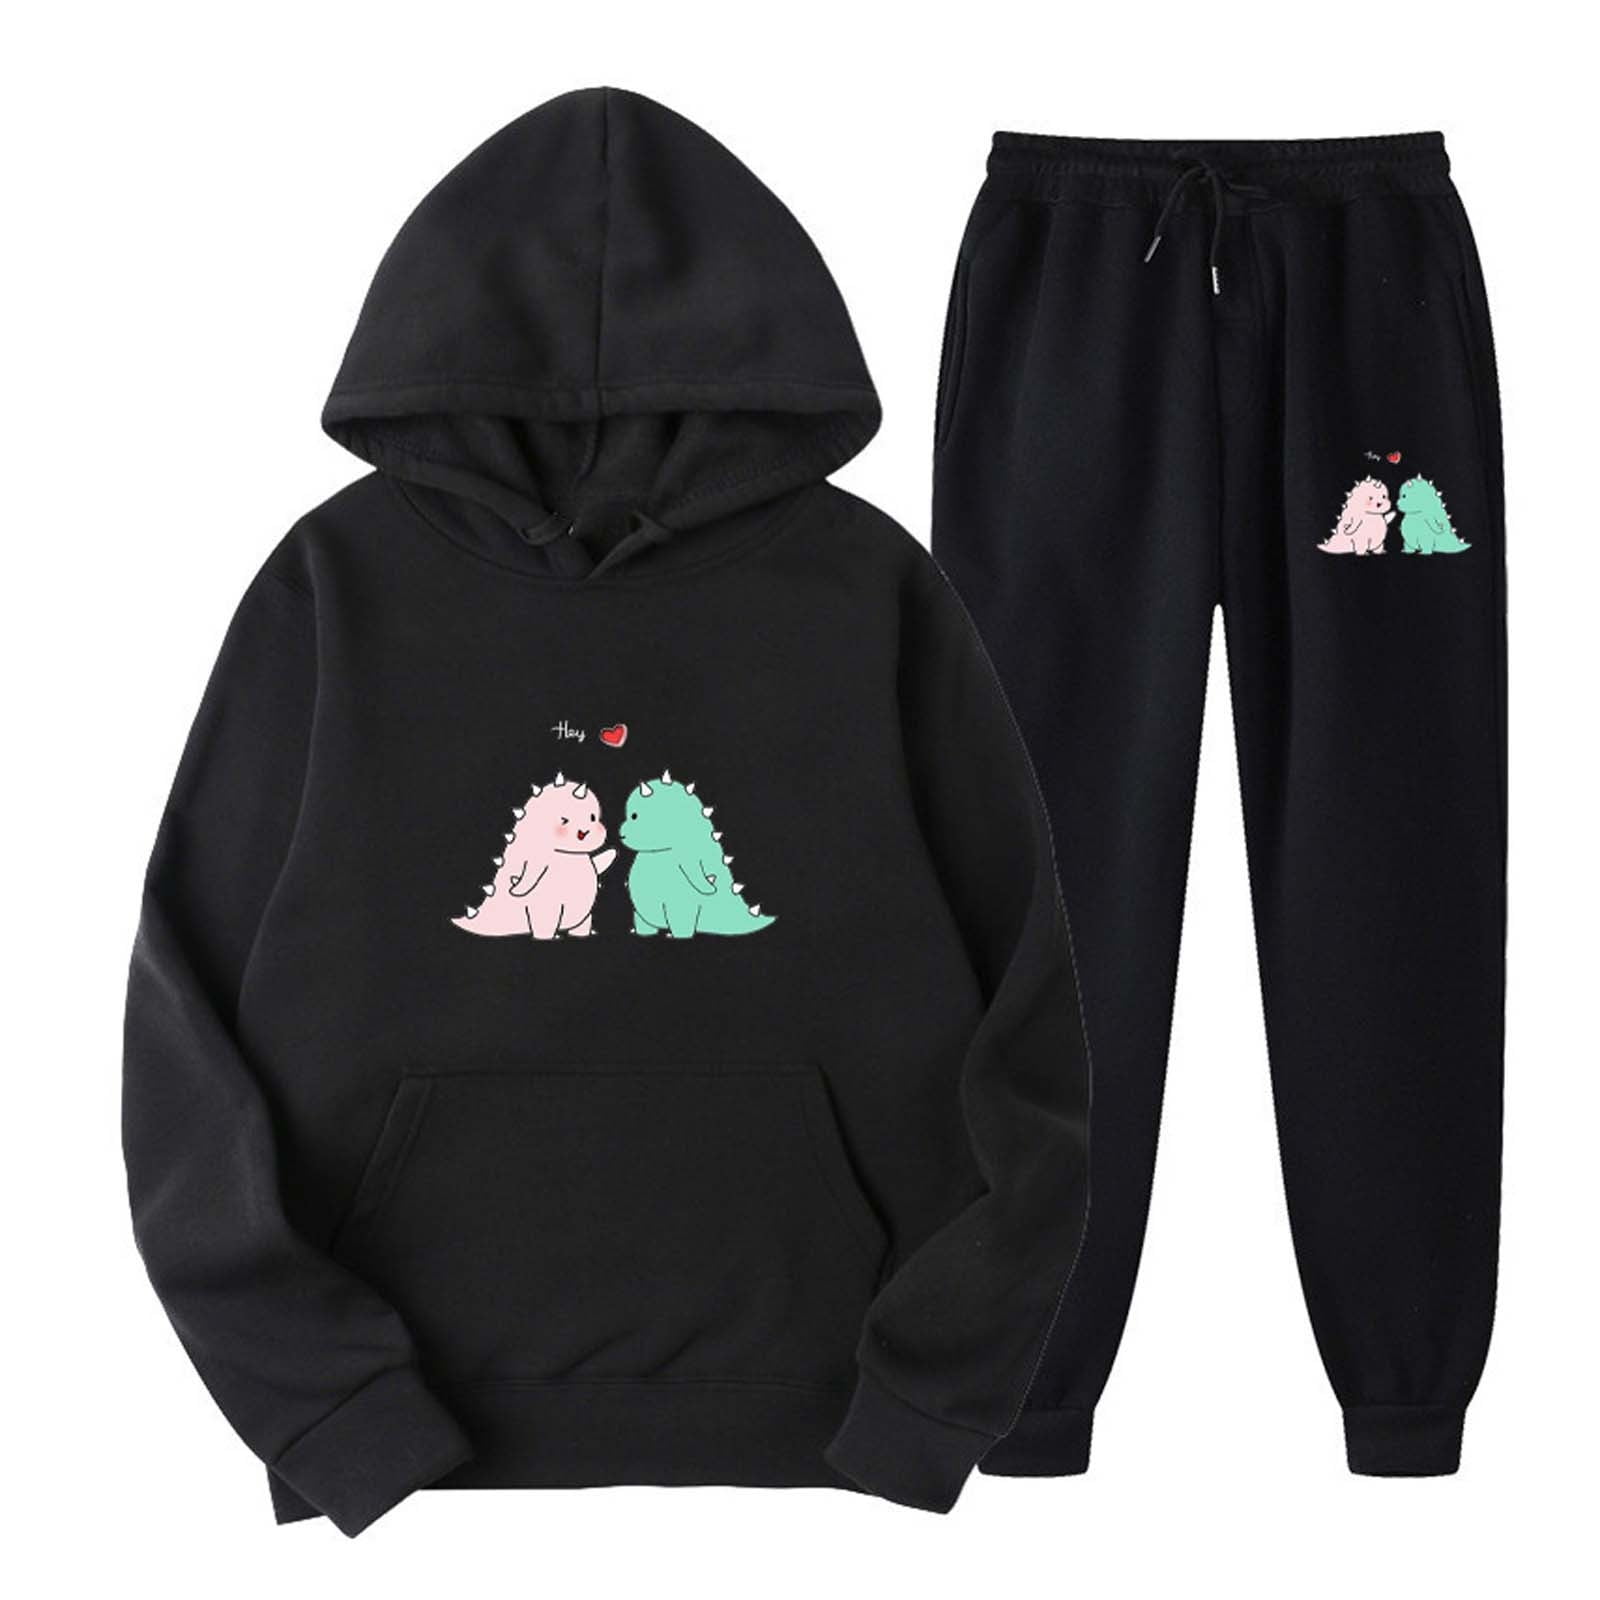 RQYYD Reduced Cute Dinosaur Graphic Hoodies and Sweatpants Set Men Women  Teen Girls Casual Sport Outfits Drawstring Jogger Tracksuits Top Army Green  M 